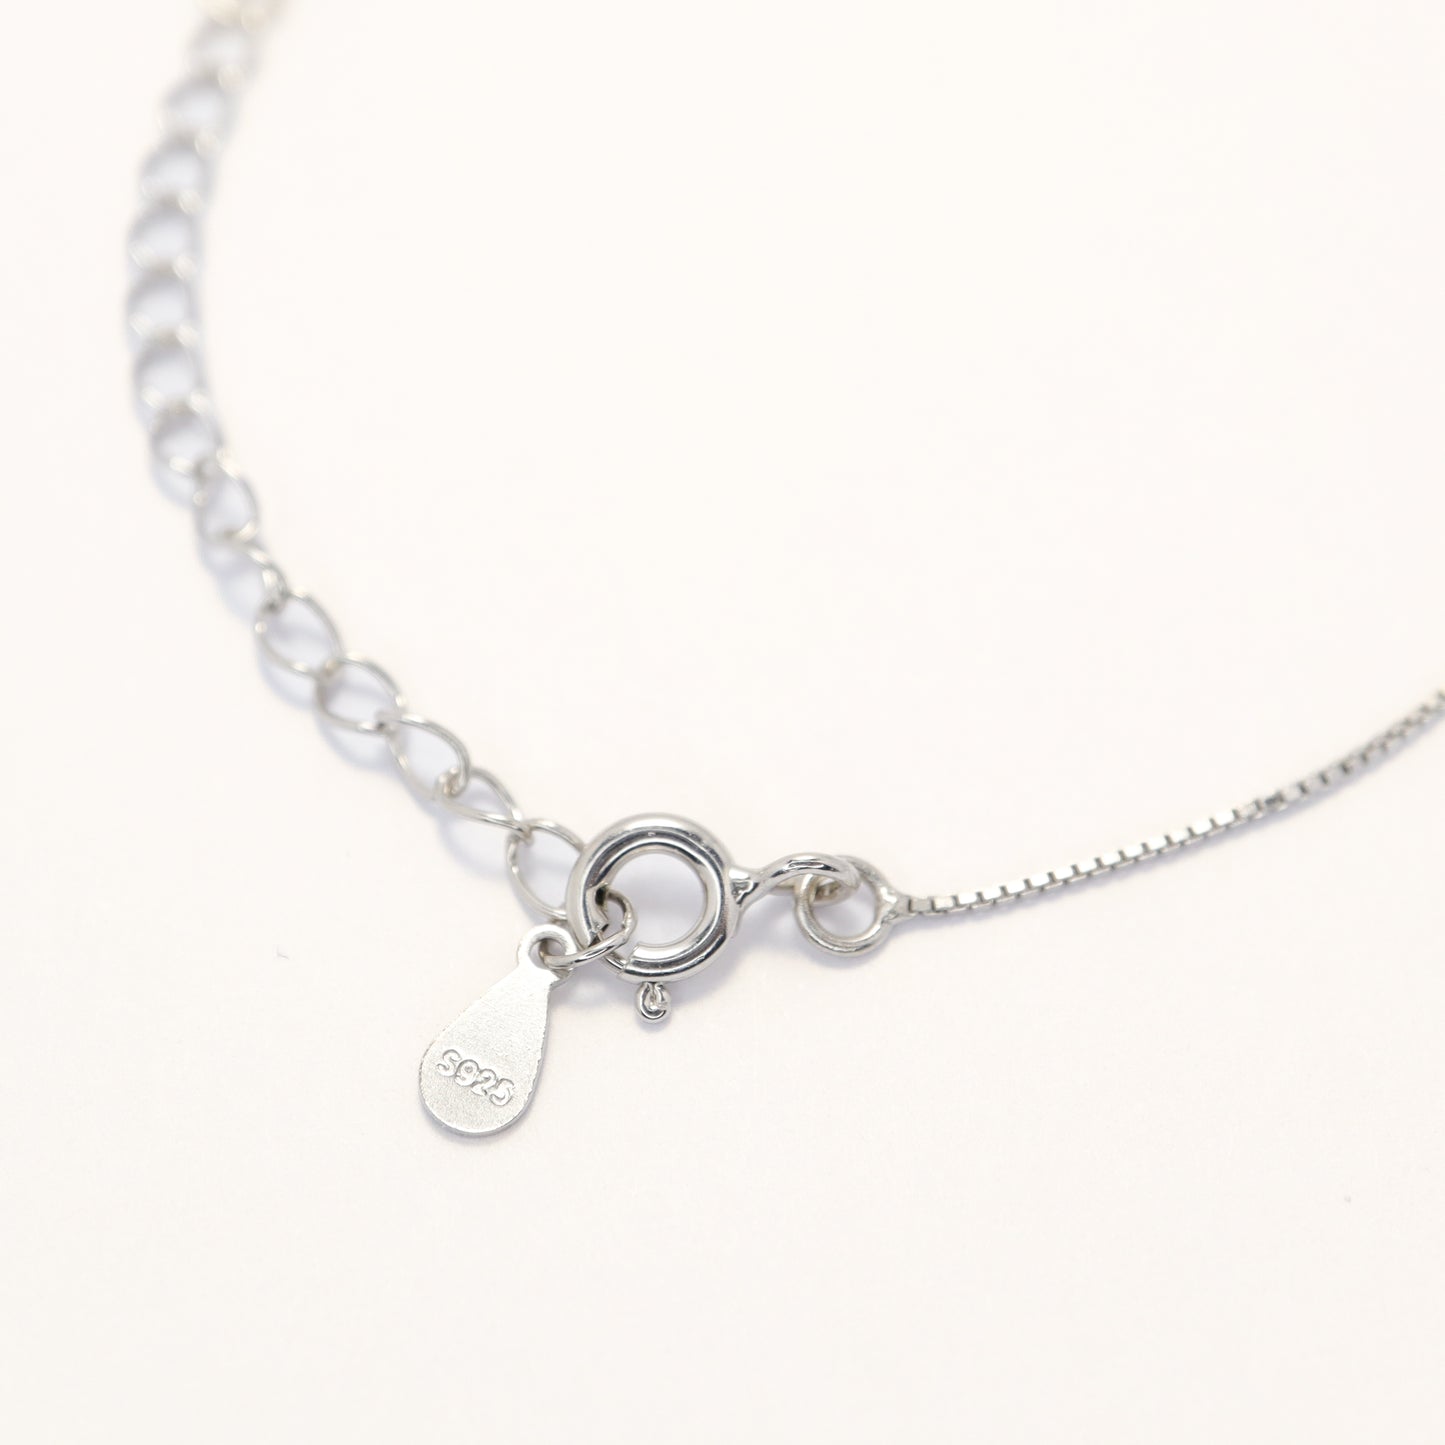 Fortune Bamboo - S925 Sterling Silver Necklace (Color: Silver)